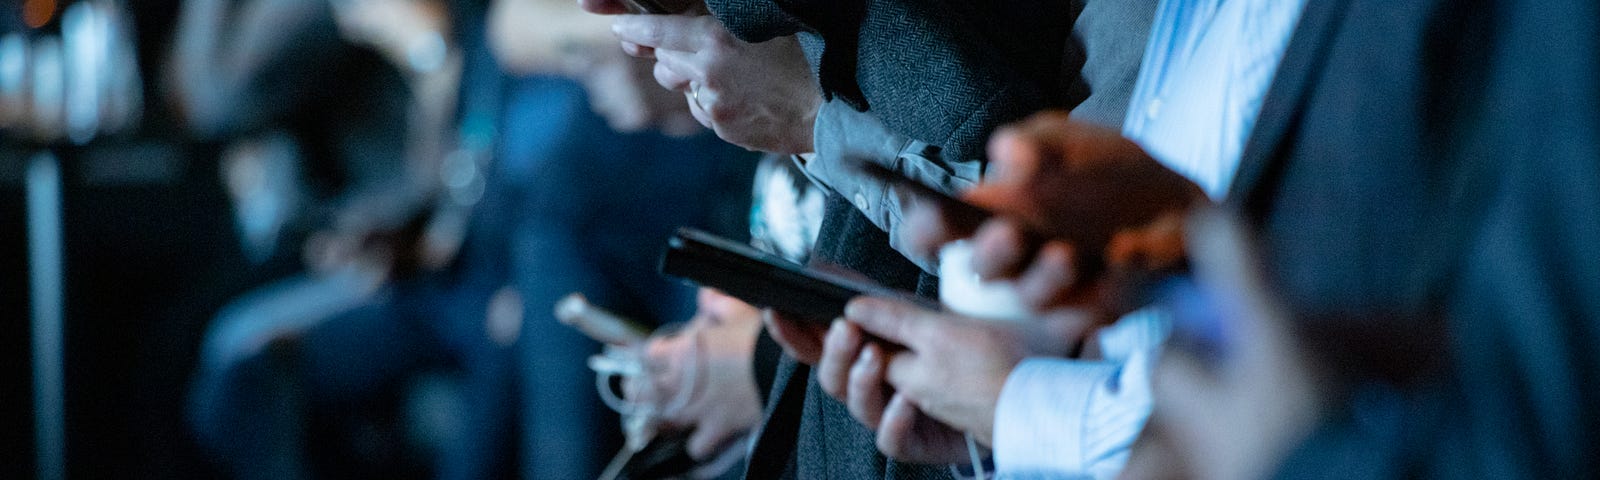 Close up photo of the hands of multiple people standing together, a cell phone in each pair of hands.